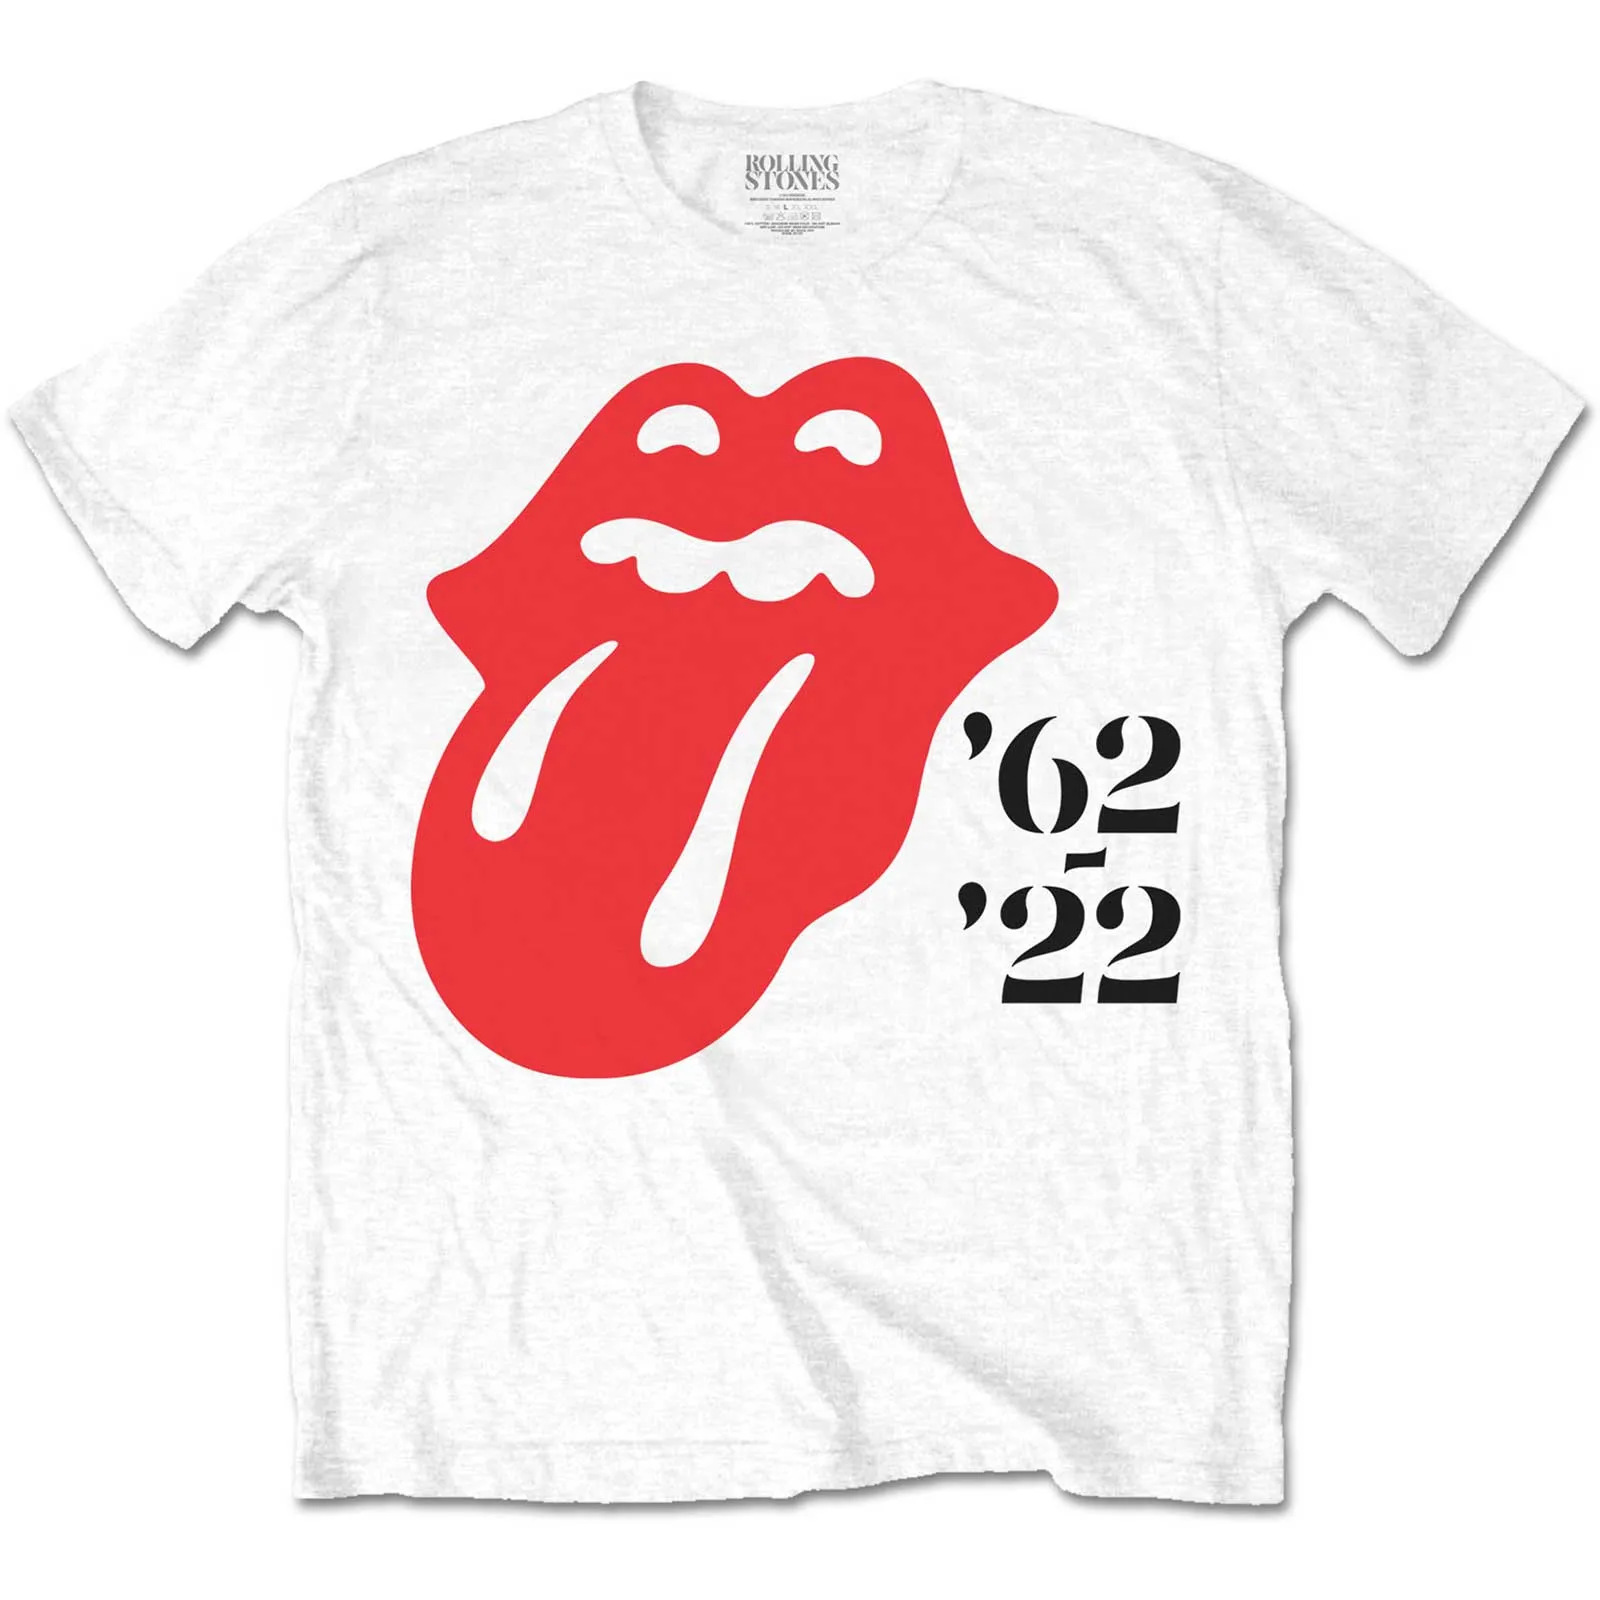 The Rolling Stones - Unisex T-Shirt Sixty '62 - '22 artwork